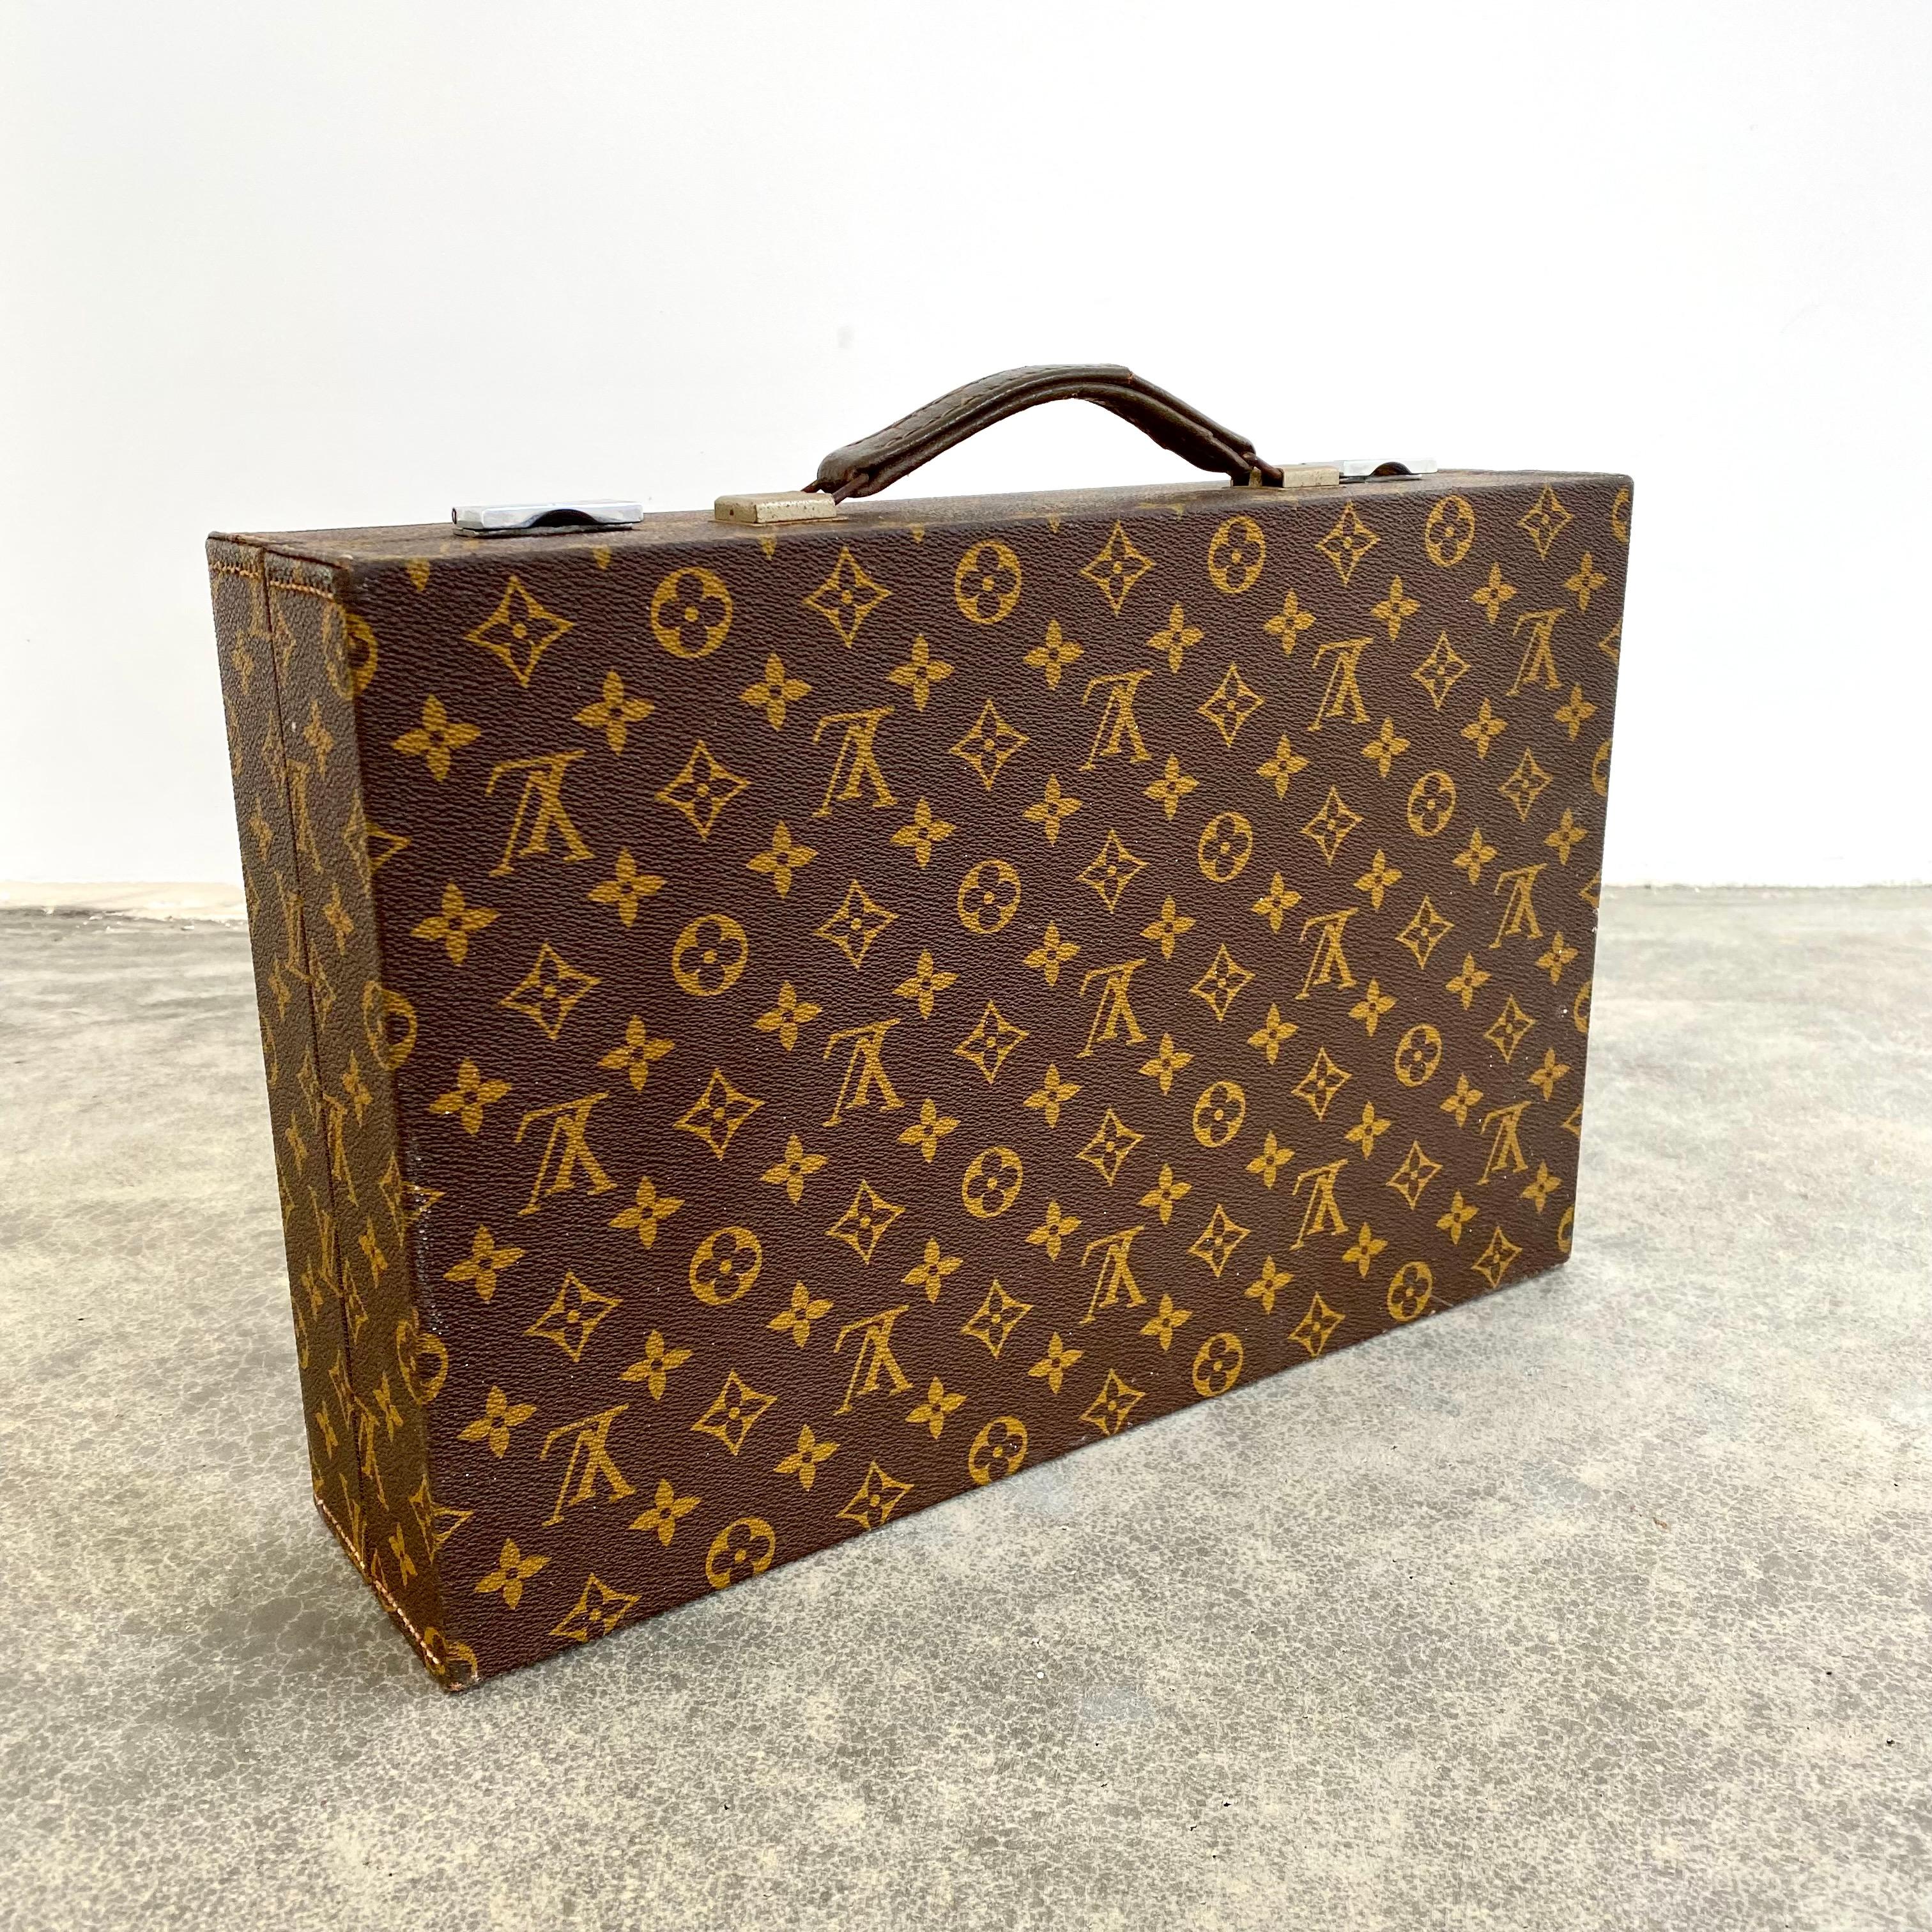 Philux Spaces collaborates with Louis Vuitton